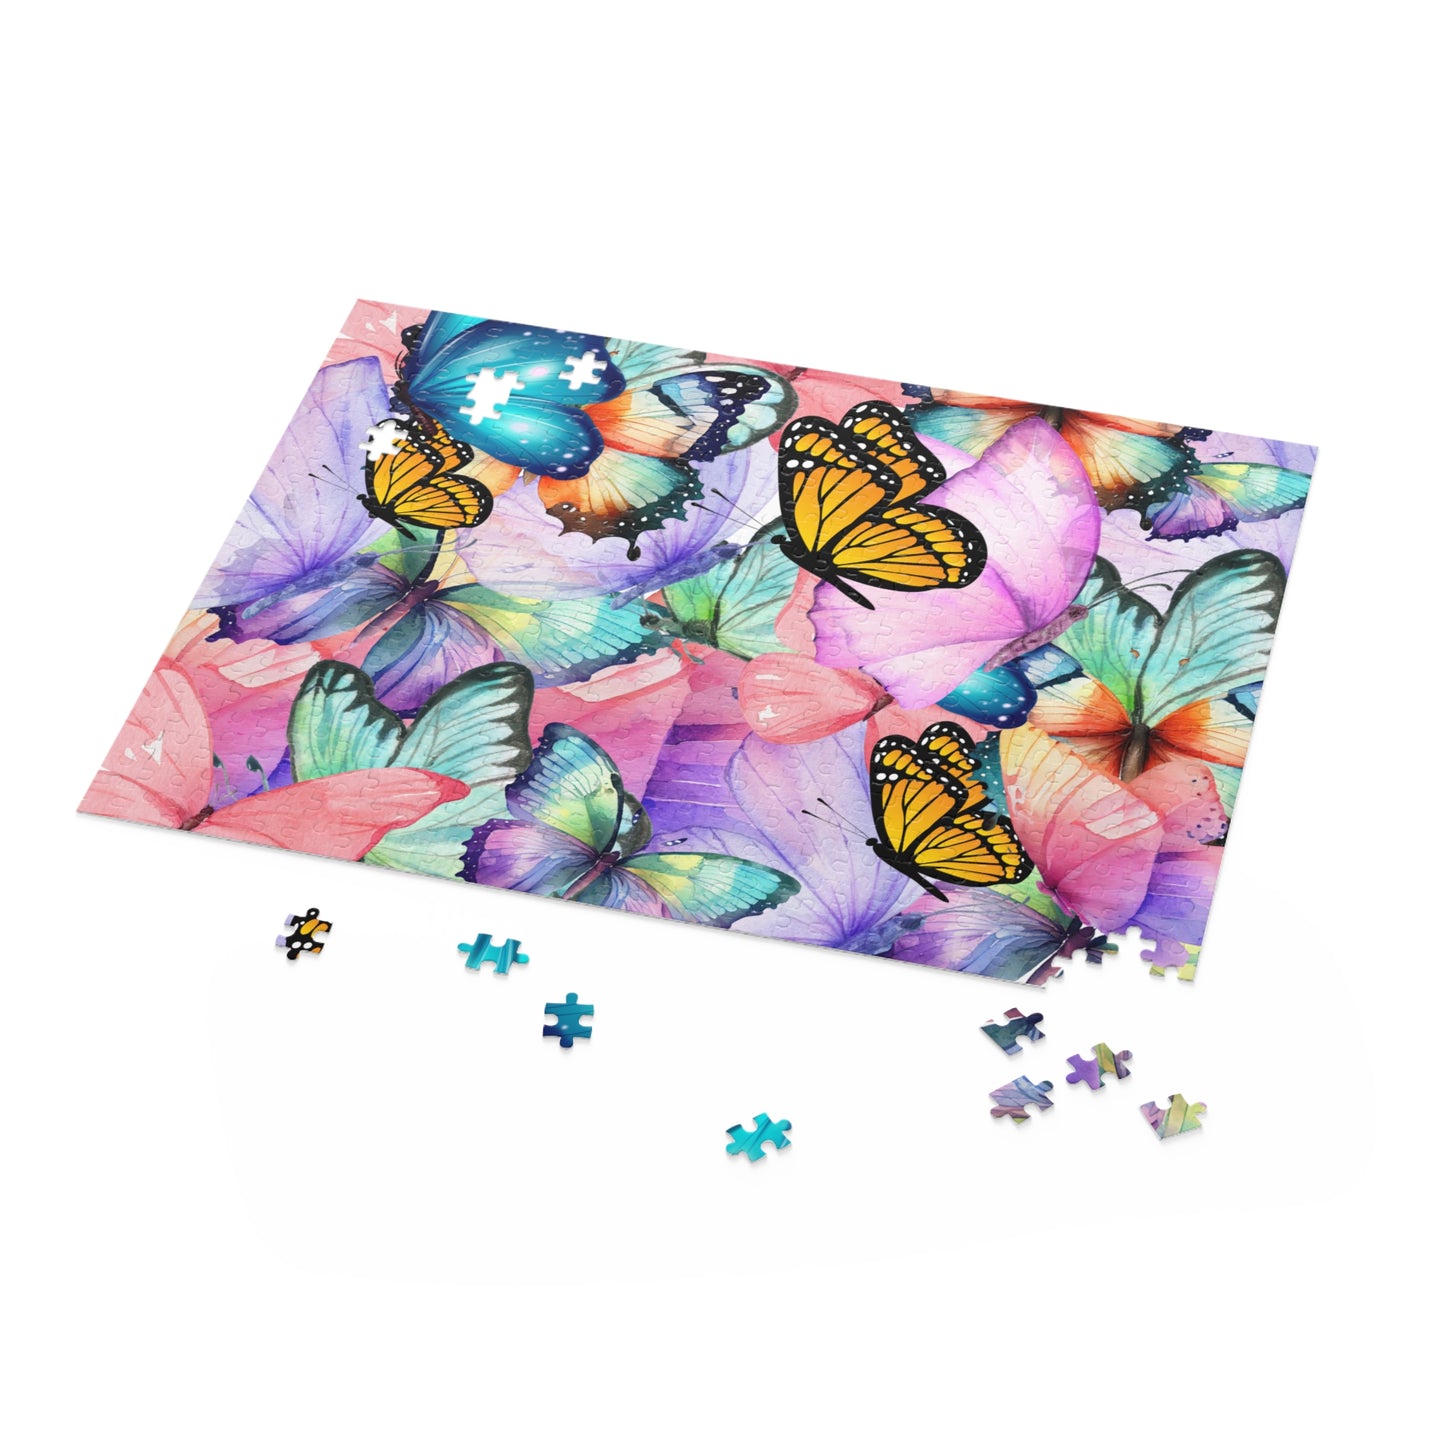 500-piece butterfly jigsaw puzzle for family game night or as a gift, nearly complete puzzle view.